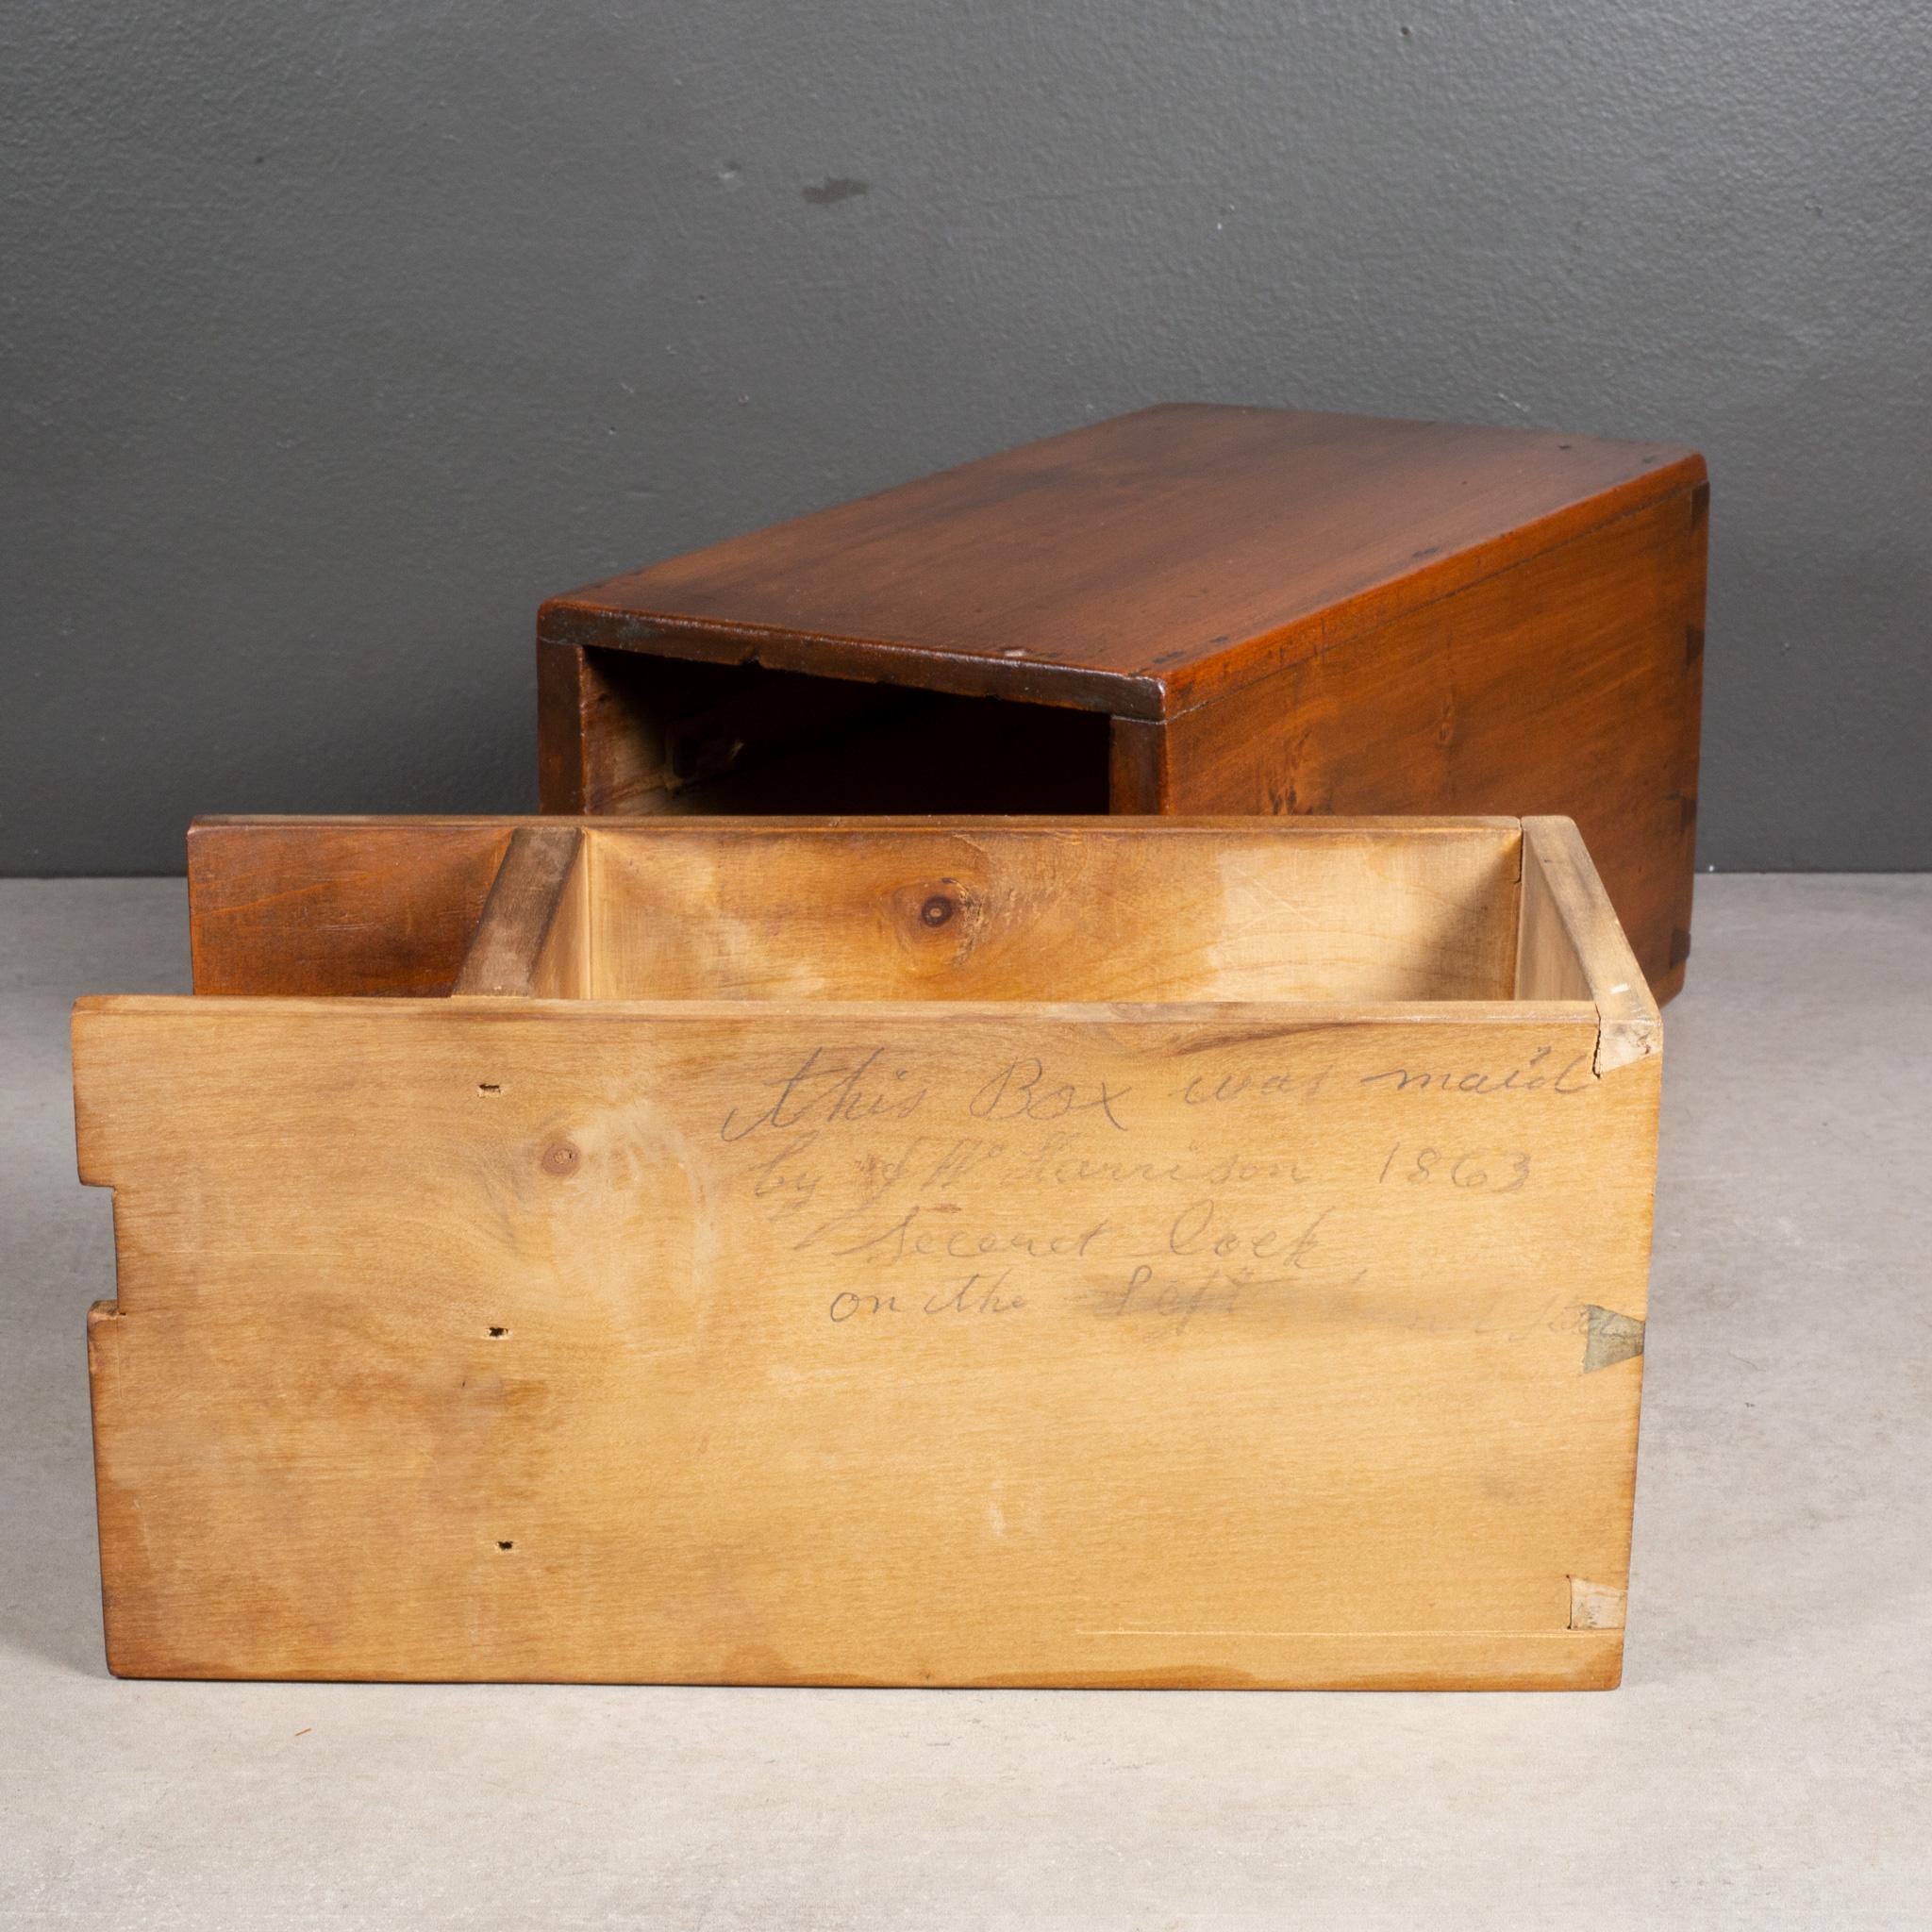 American Signed Mid-19th c. Wooden Lock Box c.1863 For Sale